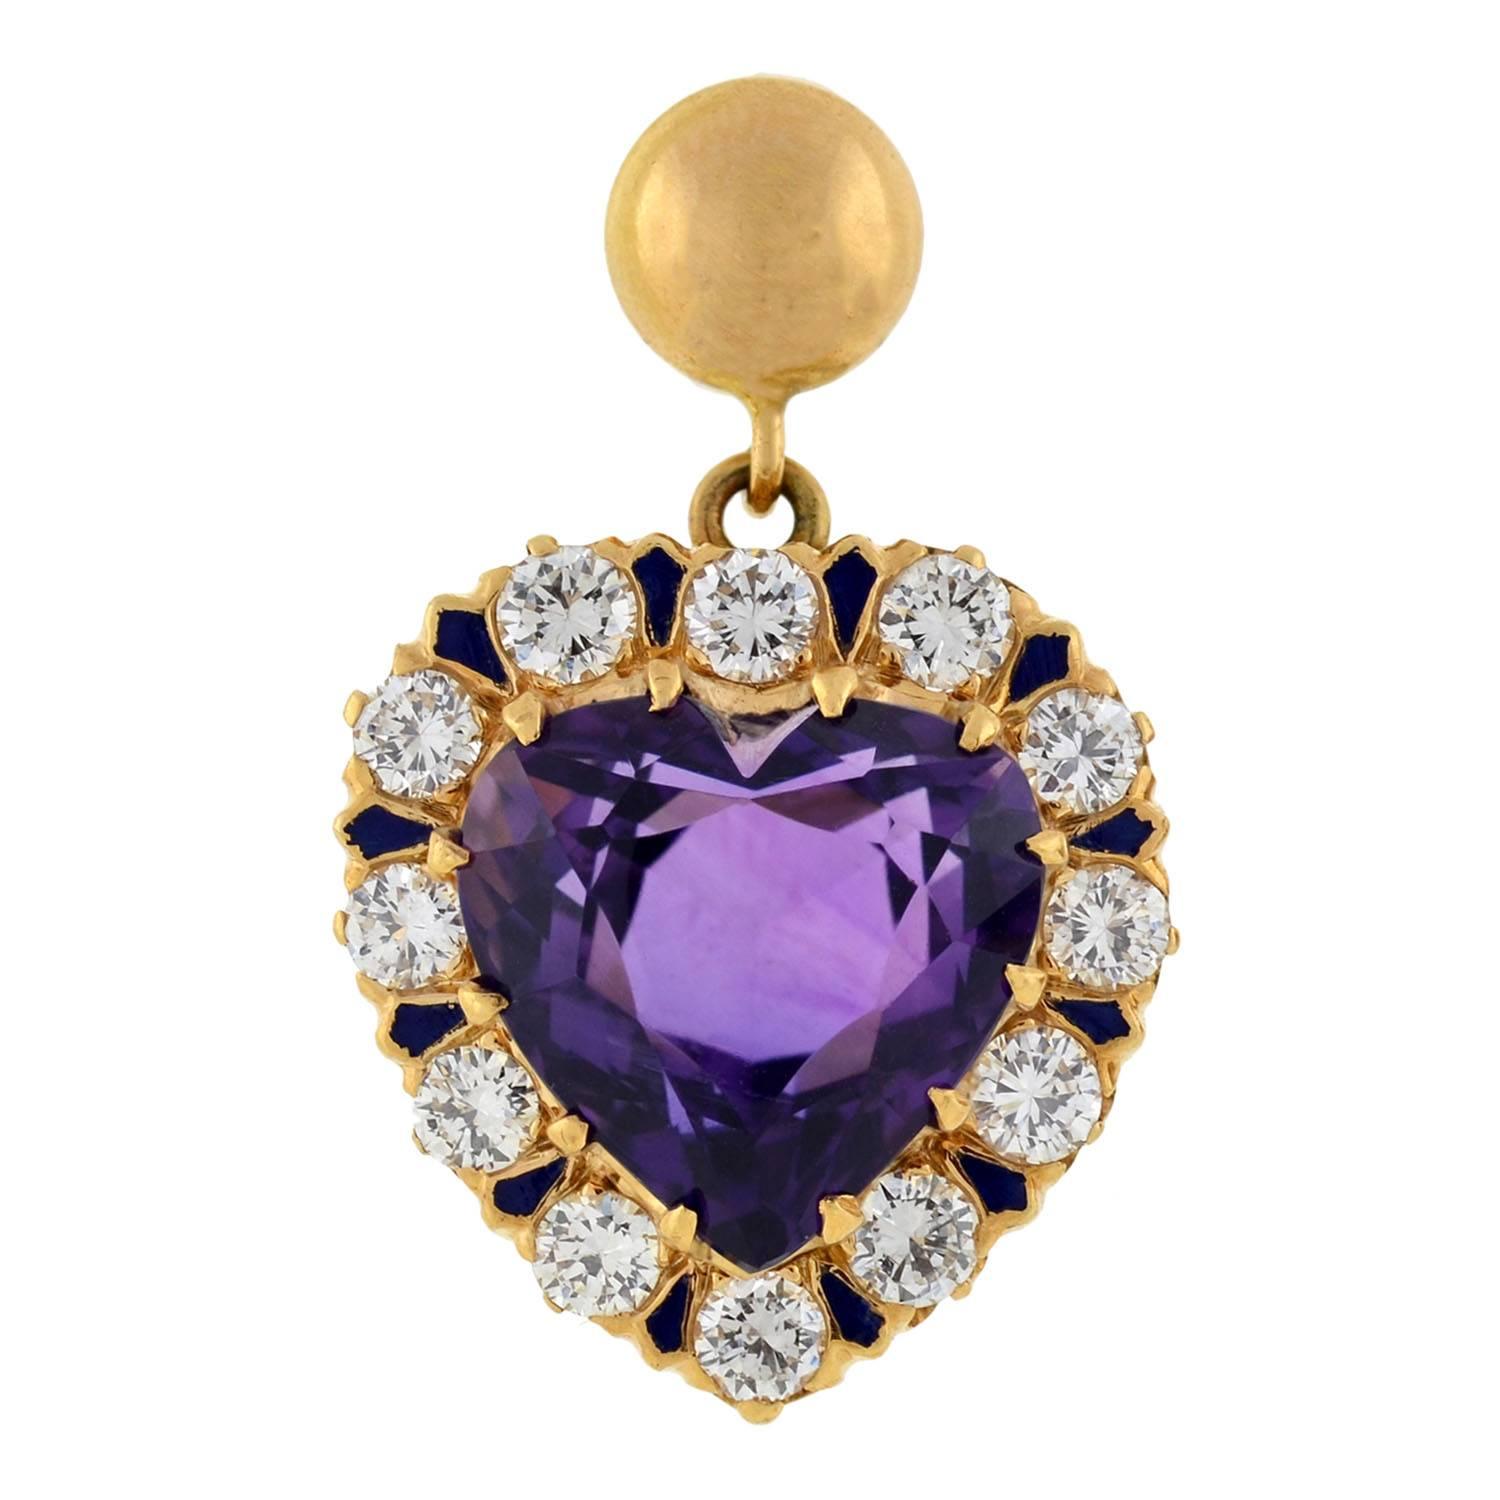 Extraordinary Victorian revival amethyst and diamond earrings from the Retro (ca1940) era! Each earring is made of 14kt yellow gold and detailed with amethyst stones, diamonds and enameling. In the center of each is a single heart-shaped amethyst